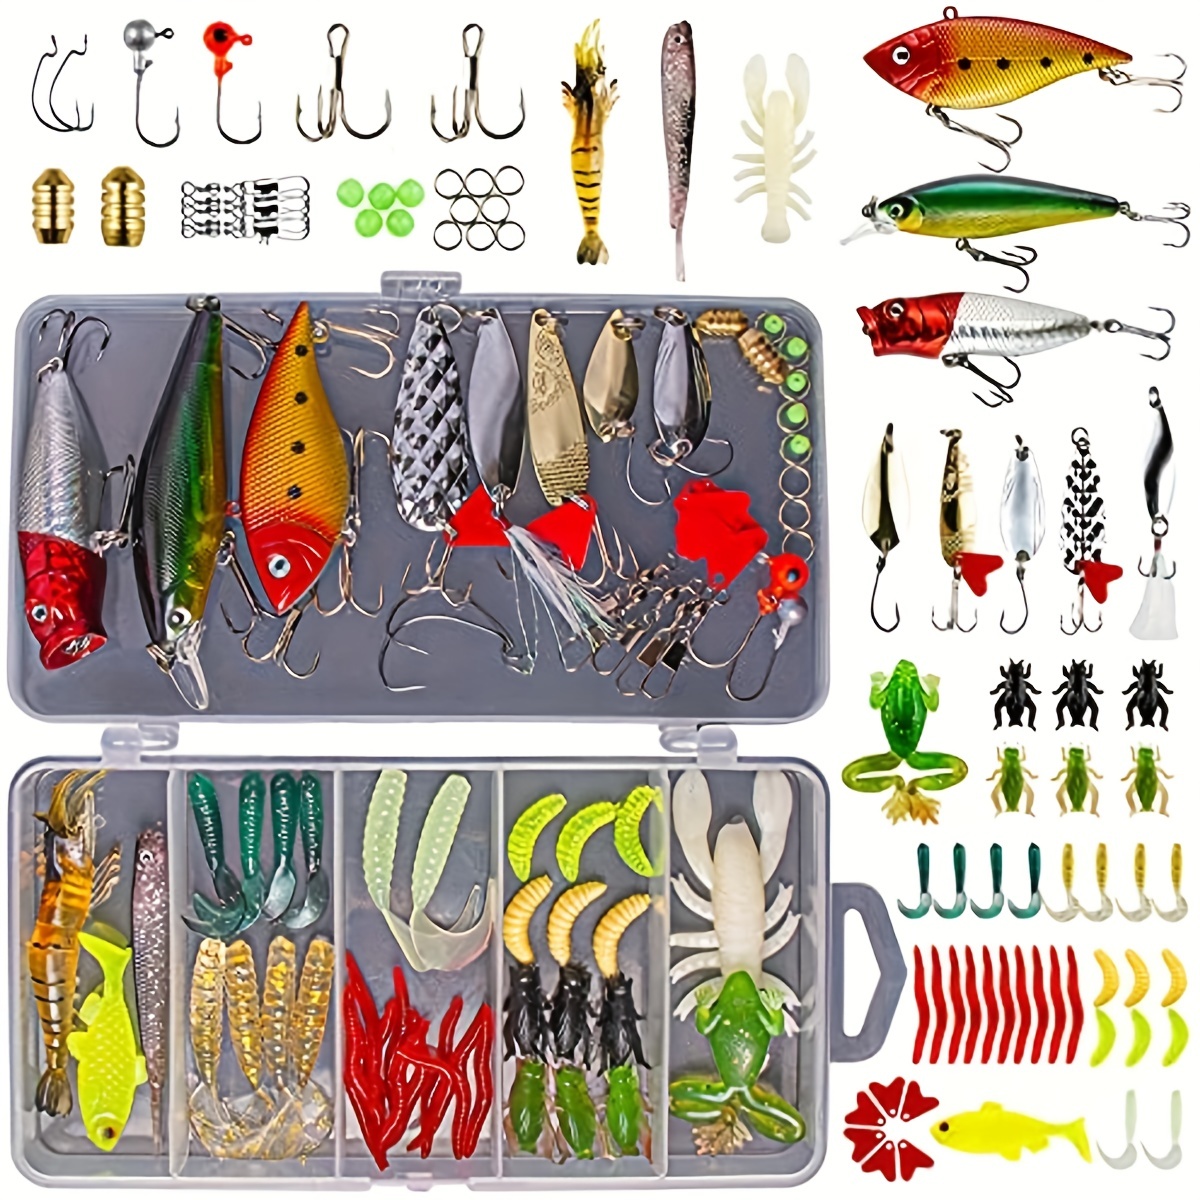 78 pcs Premium Fishing Lures Set - Includes Hard and Soft Baits for  Freshwater and Saltwater Fishing - Realistic Frog Simulation Soft Bait for  Maximum